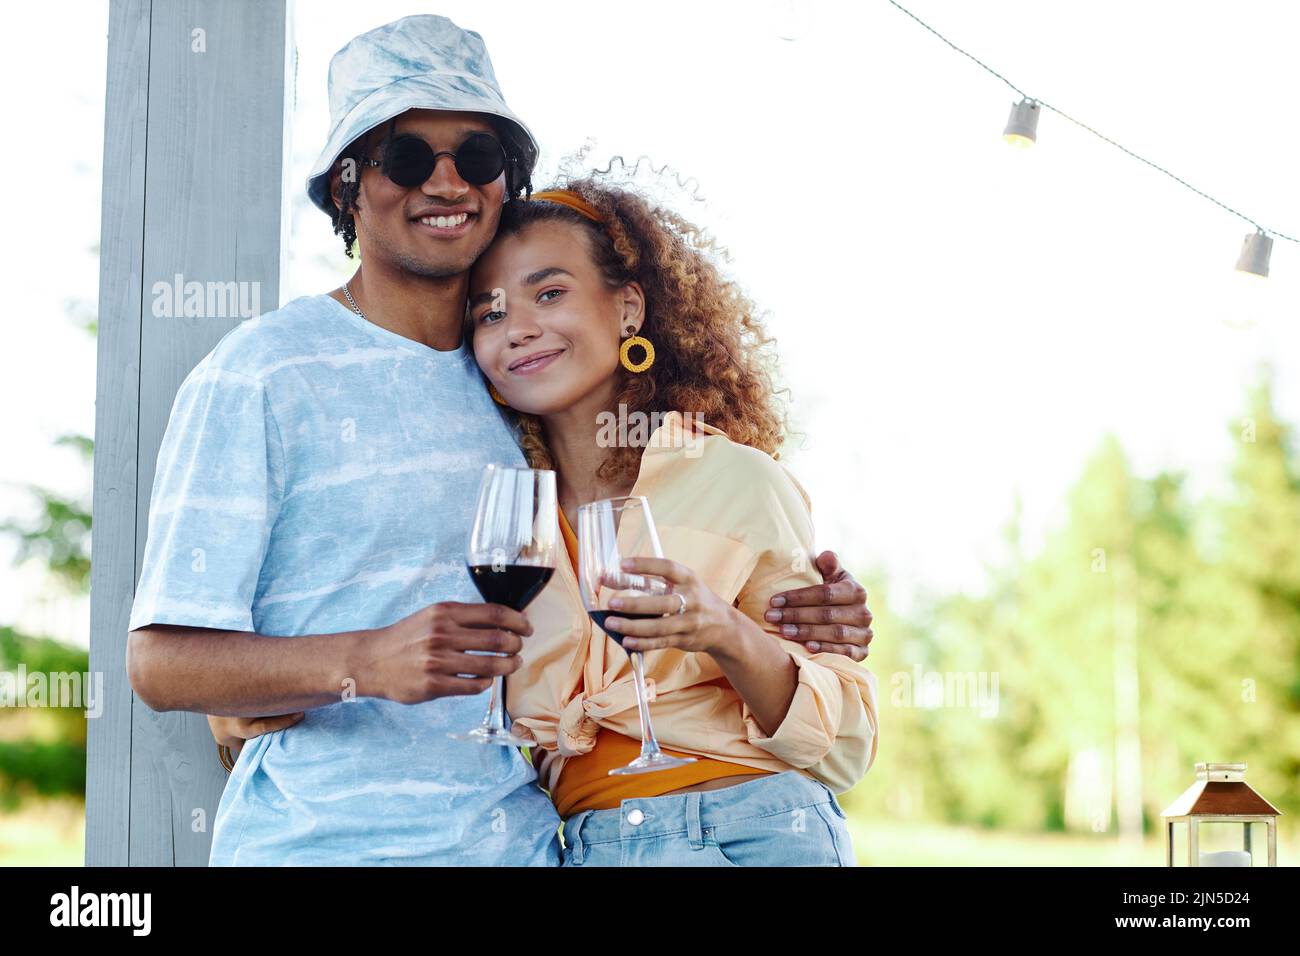 Waist up portrait of young couple embracing outdoors while enjoying romantic date in Summer , copy space Stock Photo